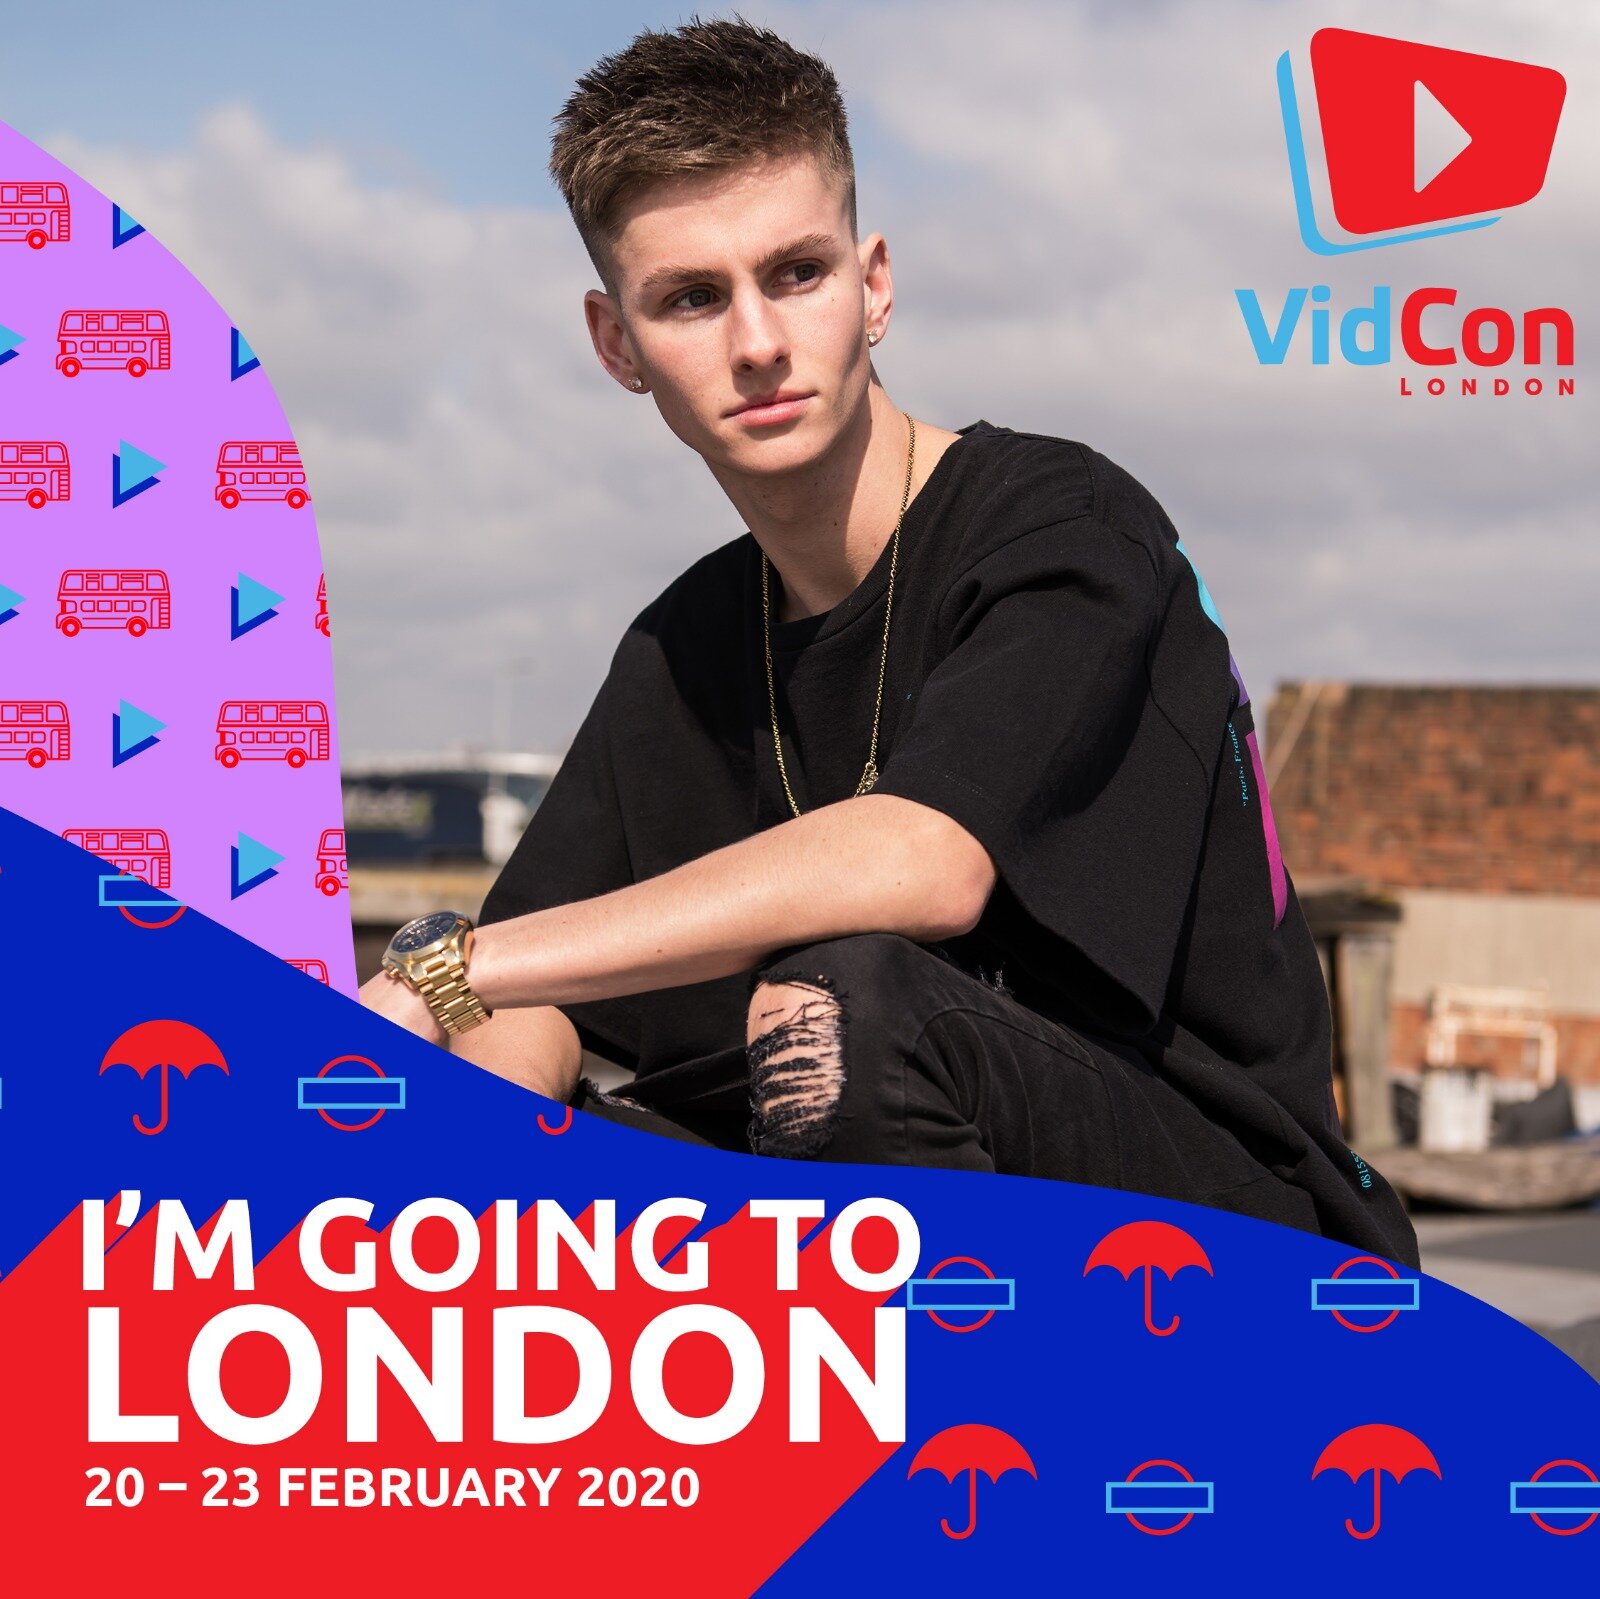 pulver Scully Multiplikation Lee Hinchcliffe, Amber Doig-Thorne and Joe Tasker Announced for VidCon  London 2020 — SHARPER